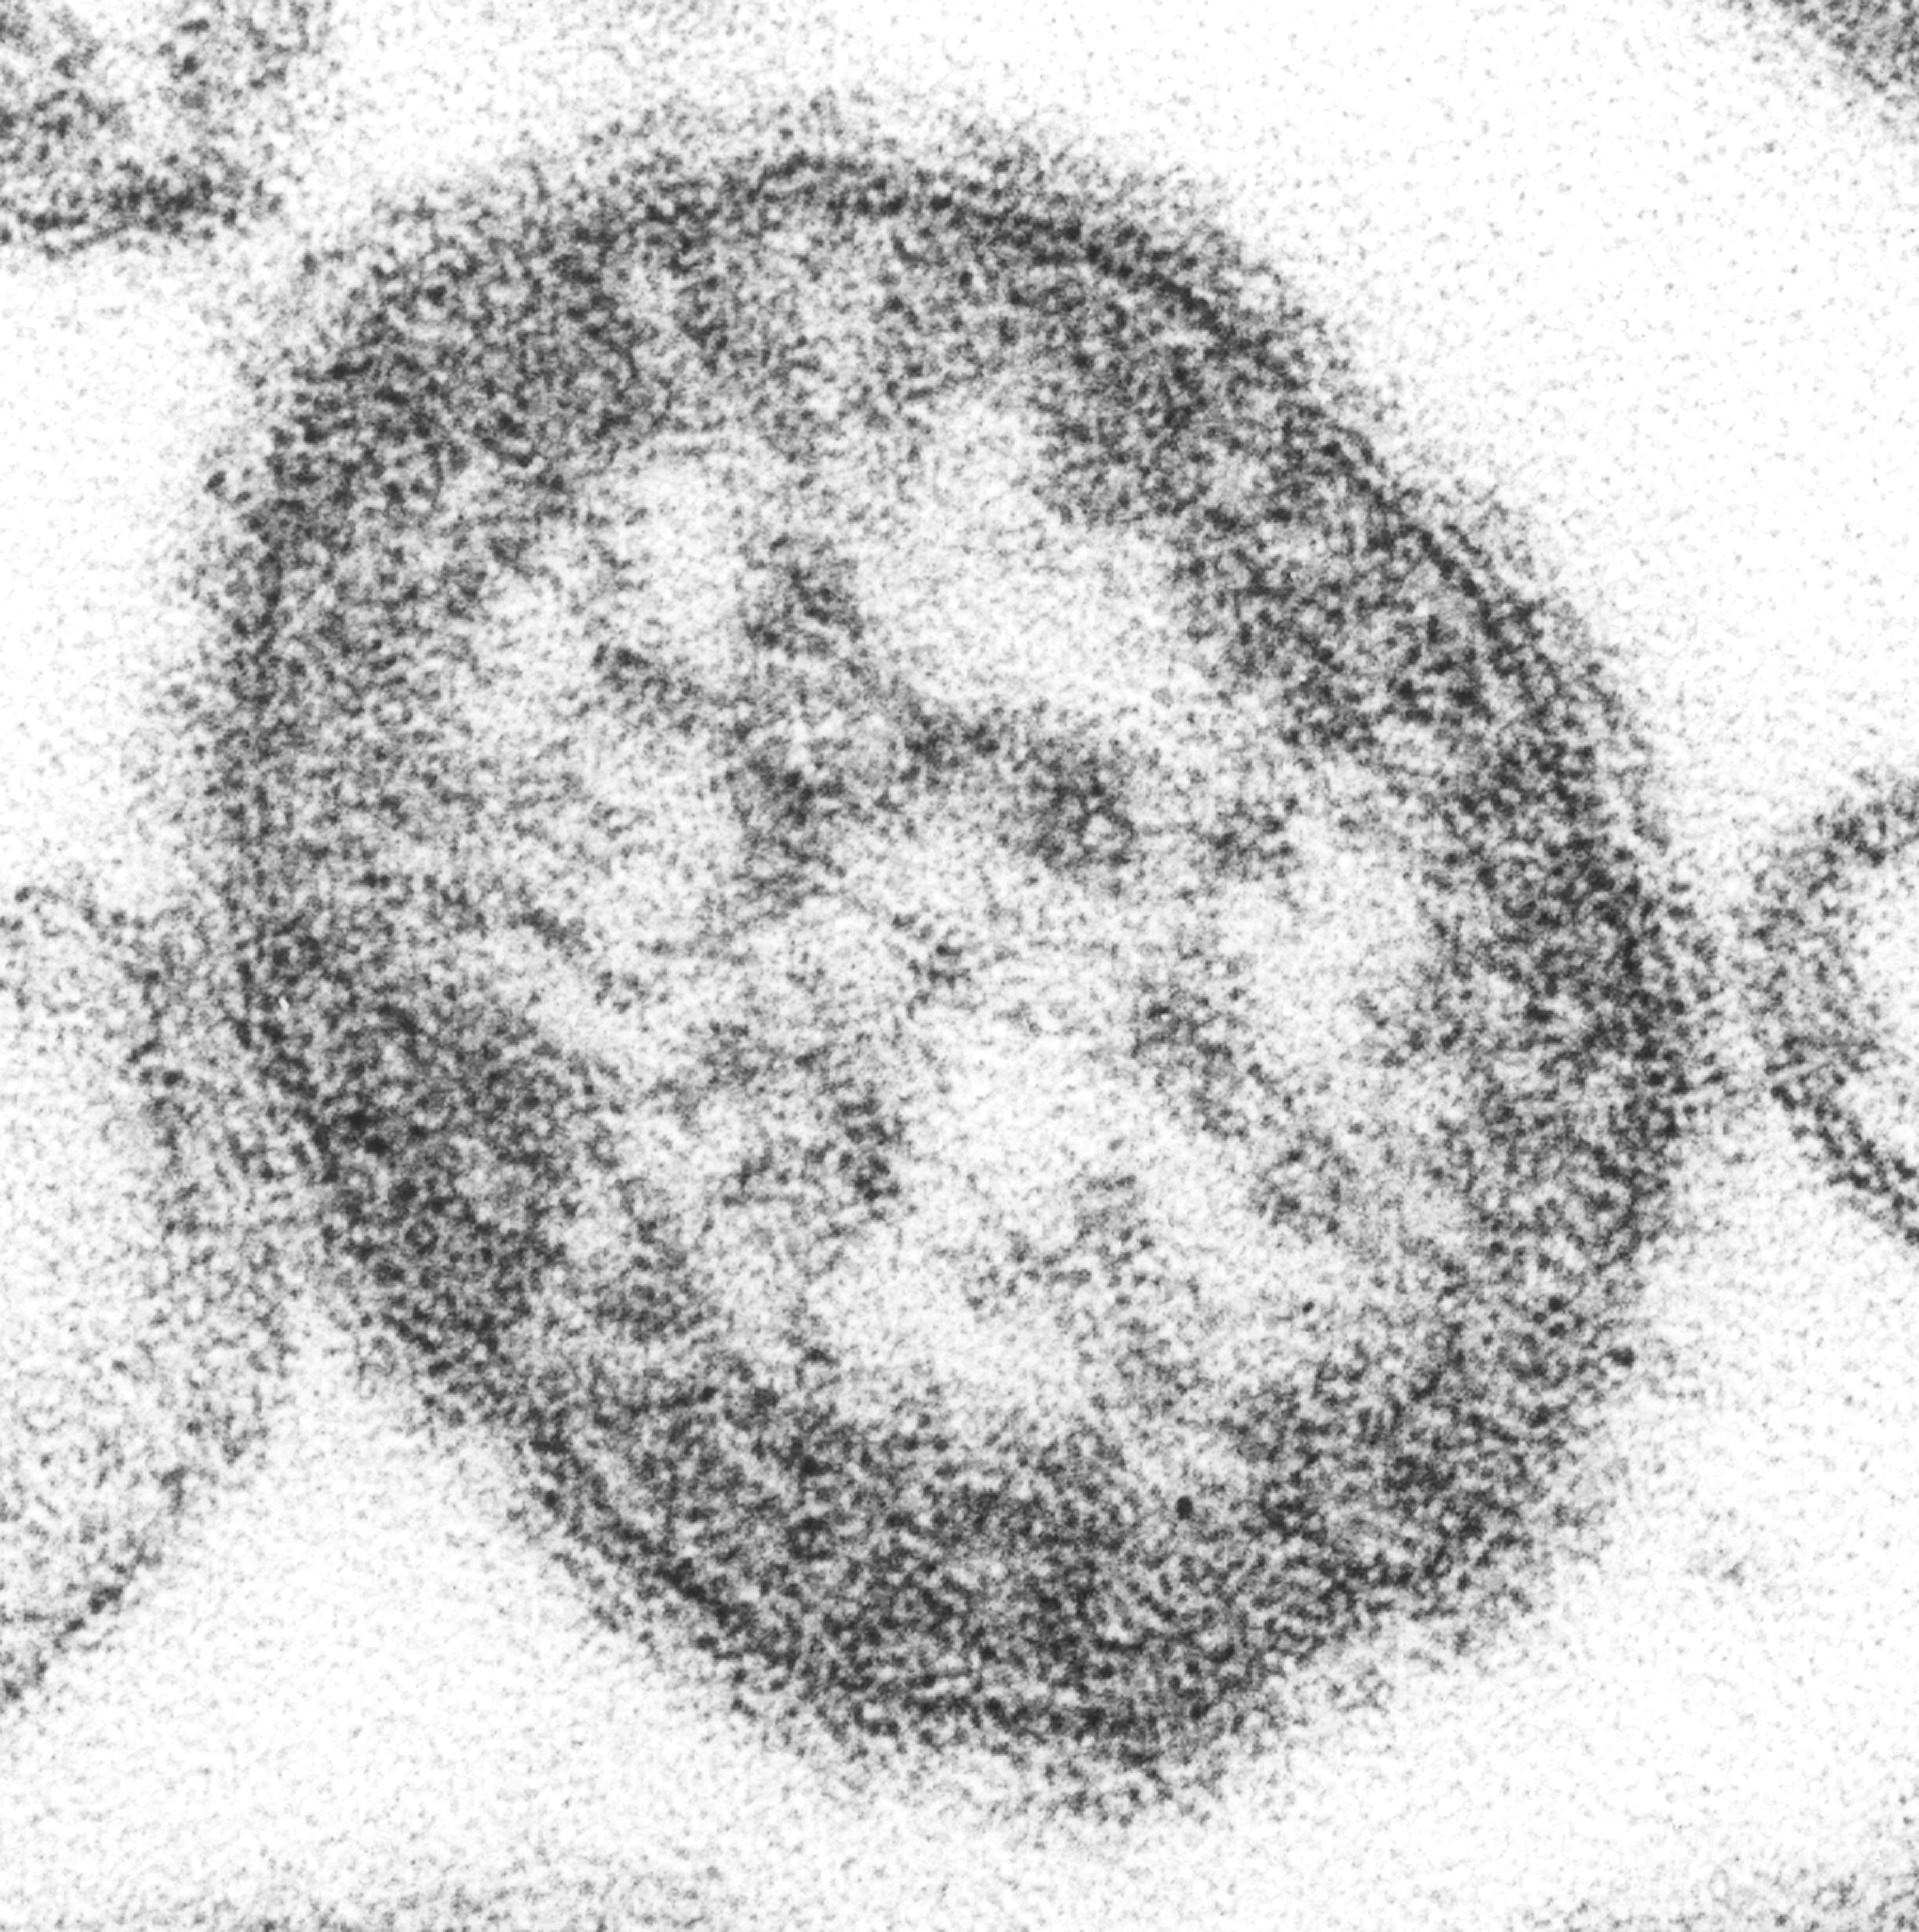 Electron microscope of single measles virus particle. Credit: Cynthia Goldsmith, U.S. Centers for Disease Control and Prevention